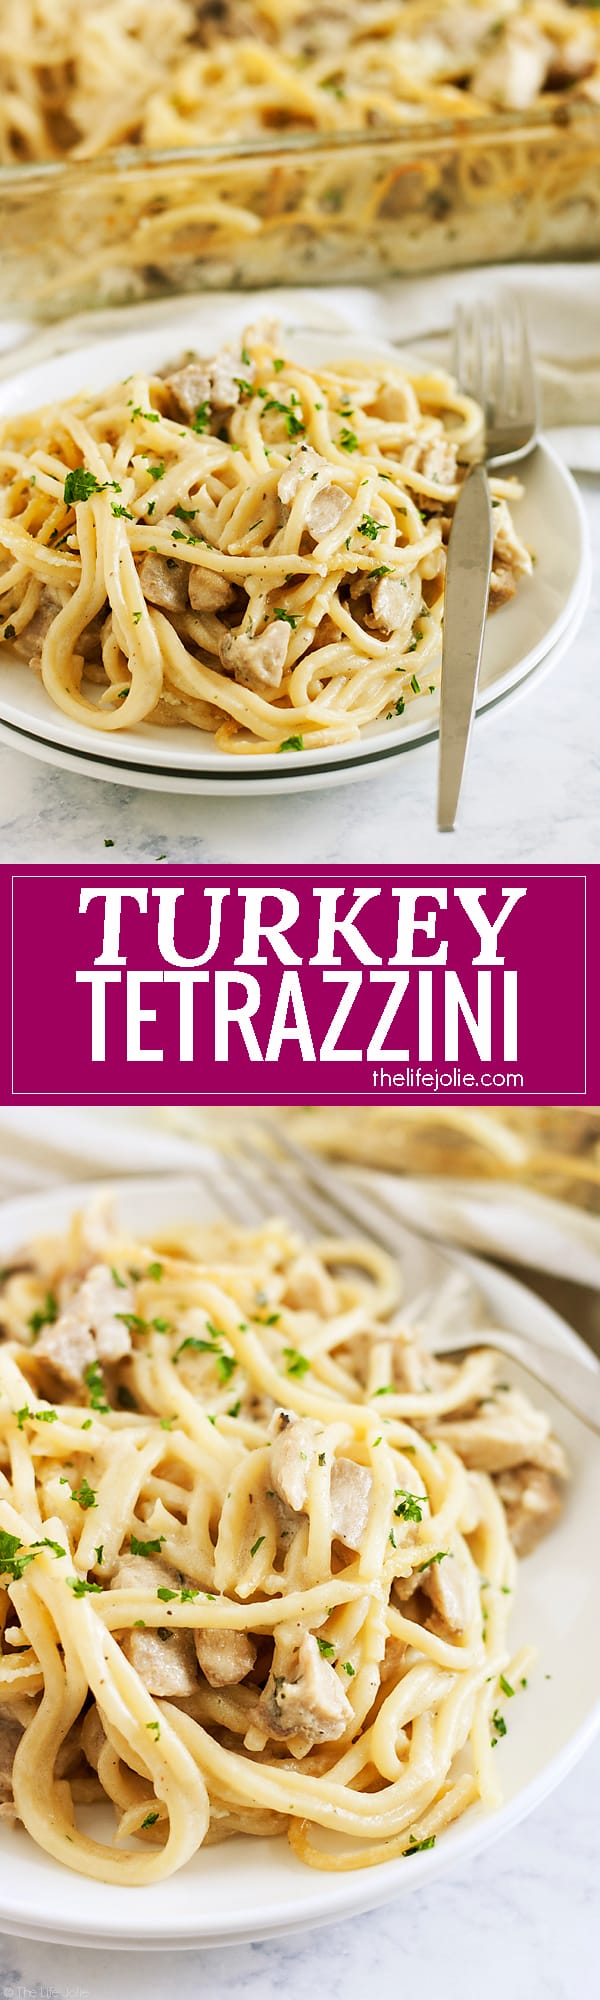 This easy Turkey Tetrazzini is a classic family recipe! This is the best way to use leftover Turkey (or chicken!) from Thanksgiving. It's creamy but still light and delicious to eat- it's the ultimate comfort food!